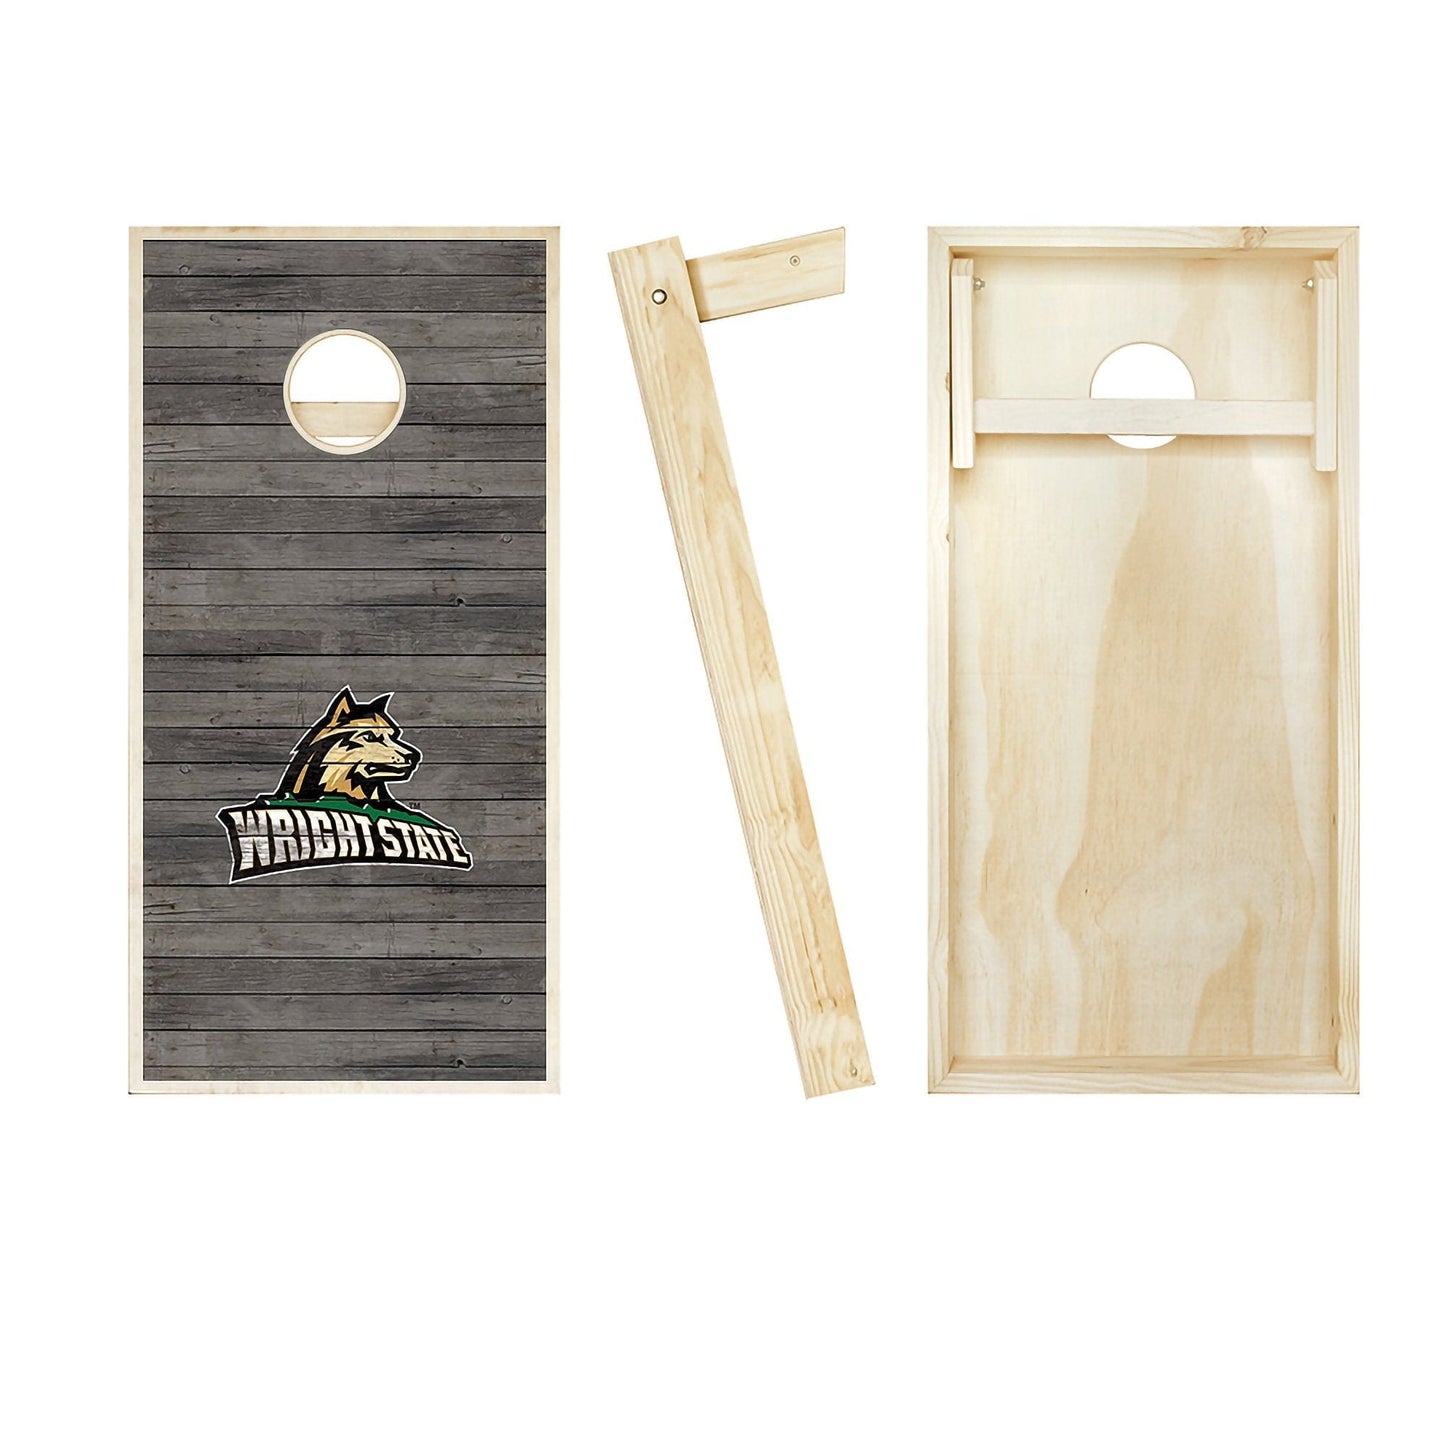 Wright State Distressed board entire set